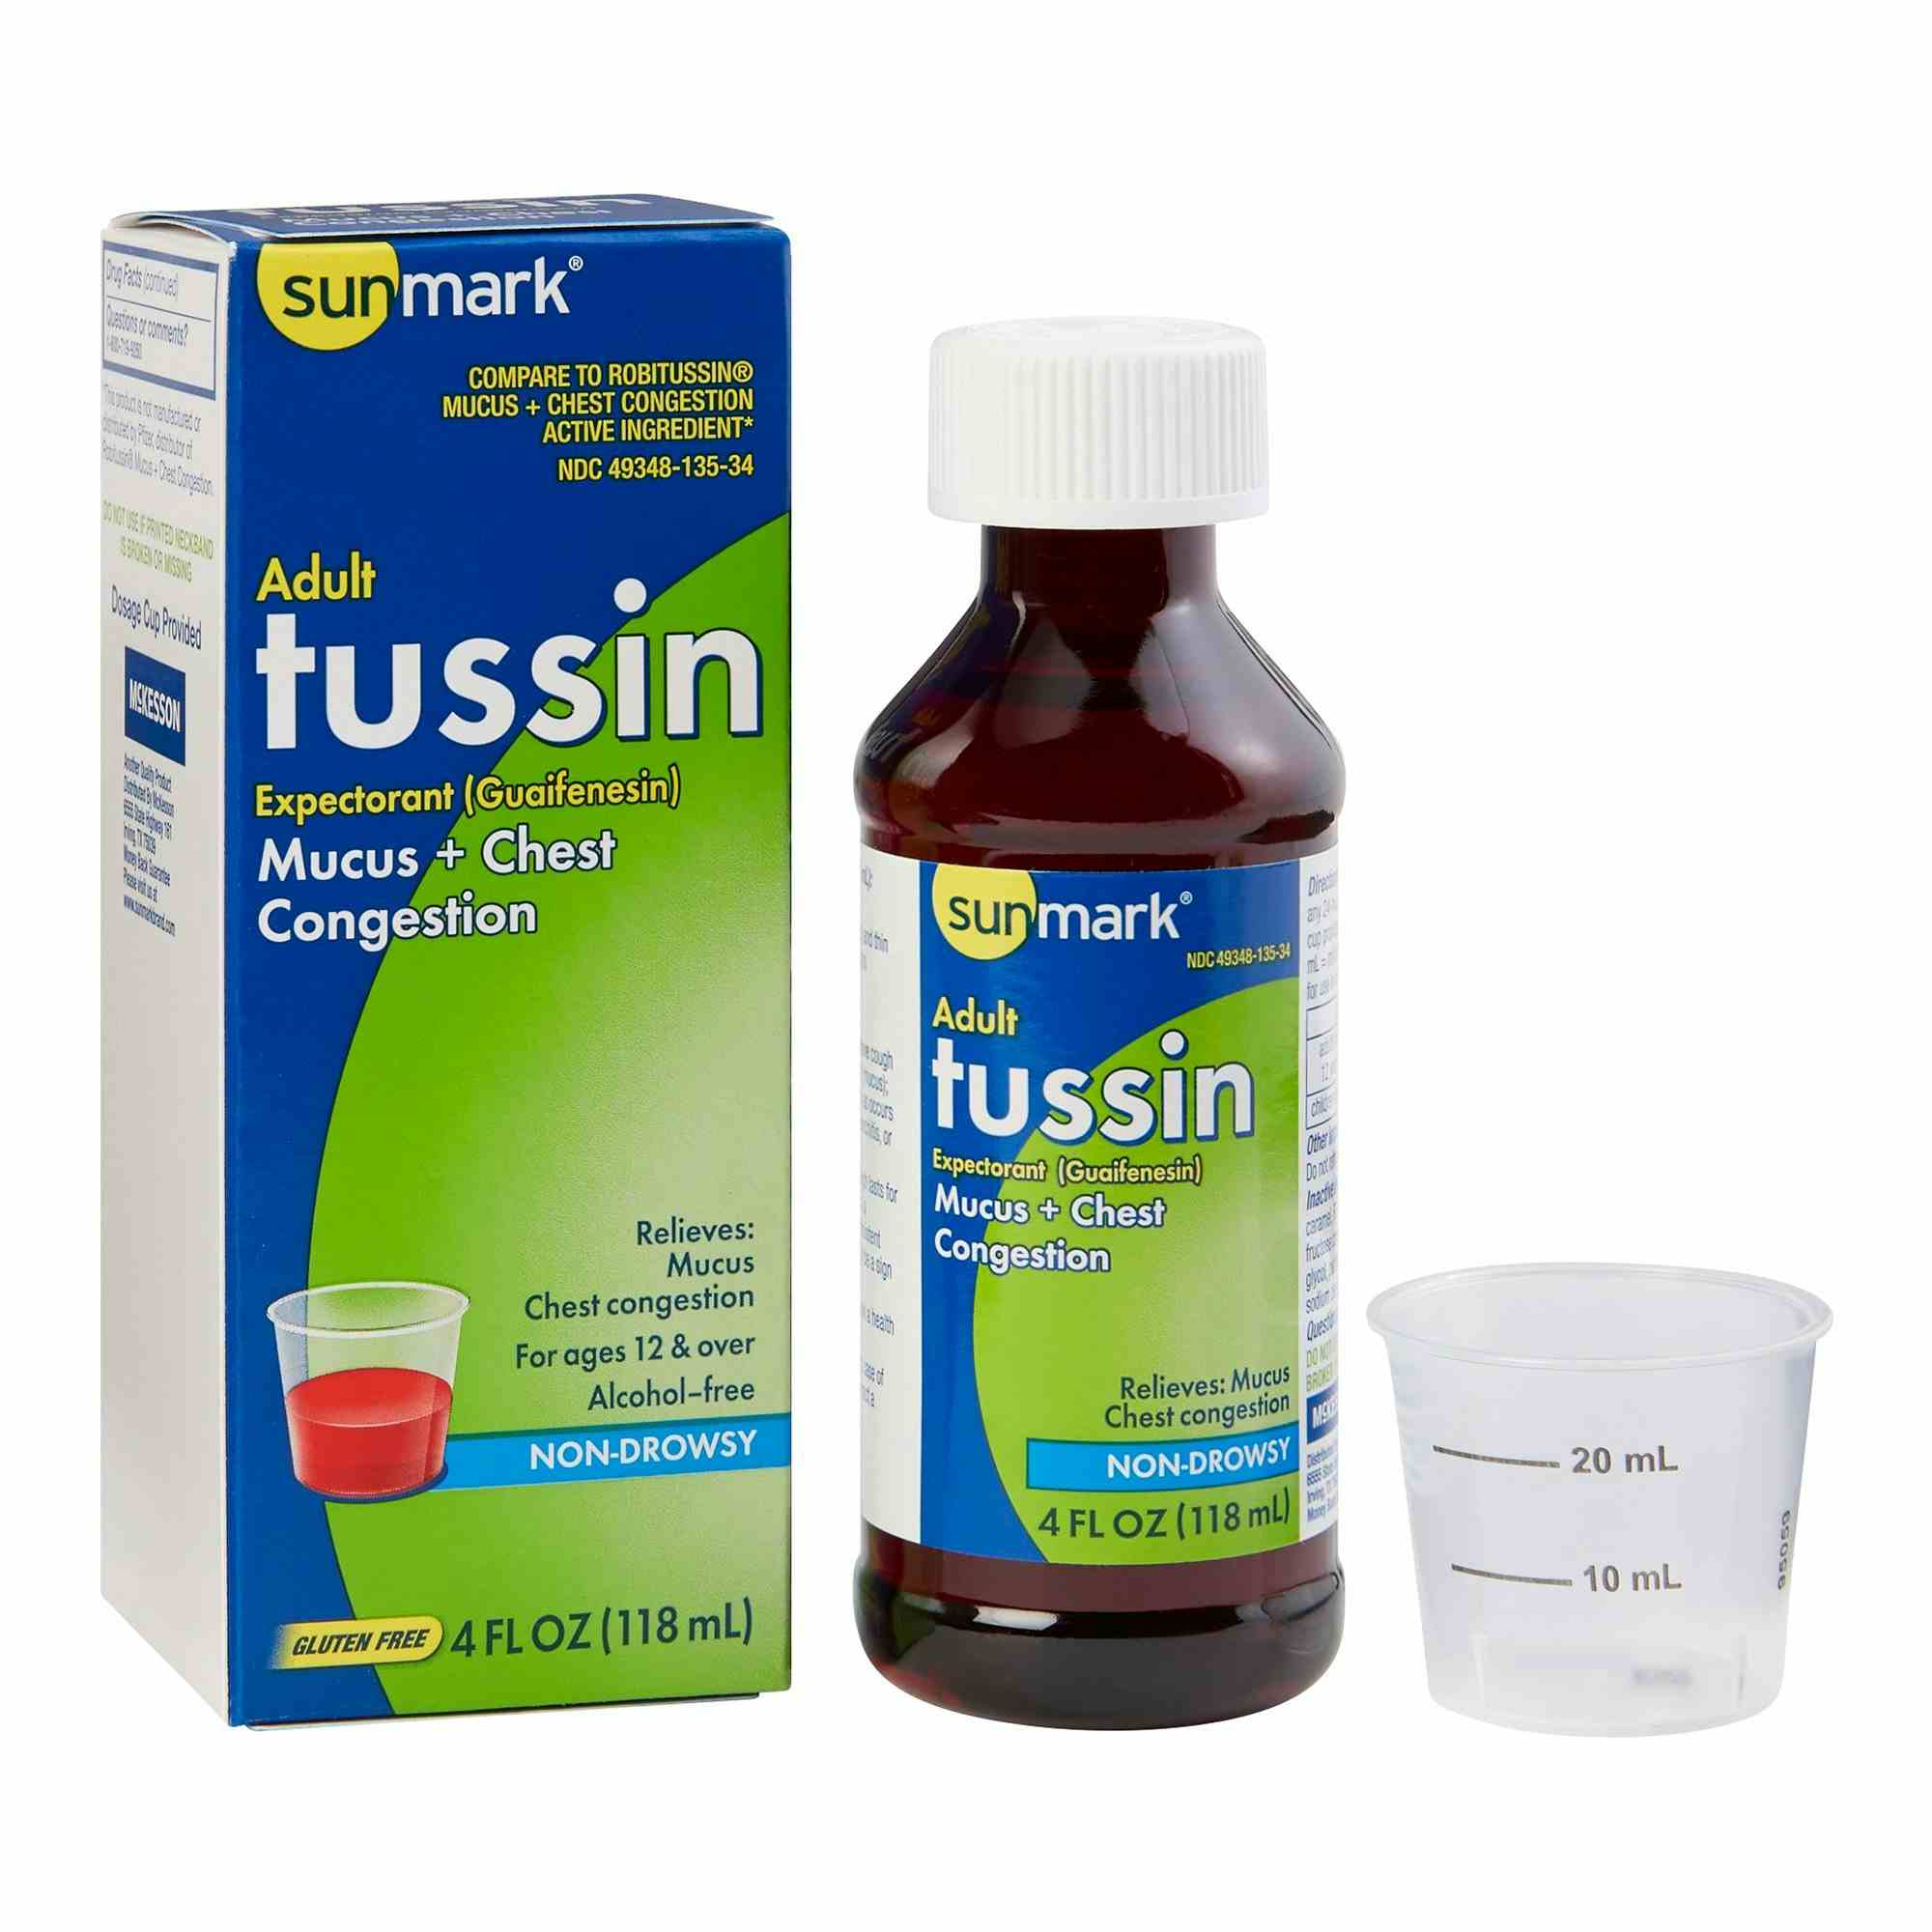 sunmark Adult Tussin Mucus + Chest Congestion Relief, 200 mg/5 mL, 4 oz., 49348013534, 1 Bottle